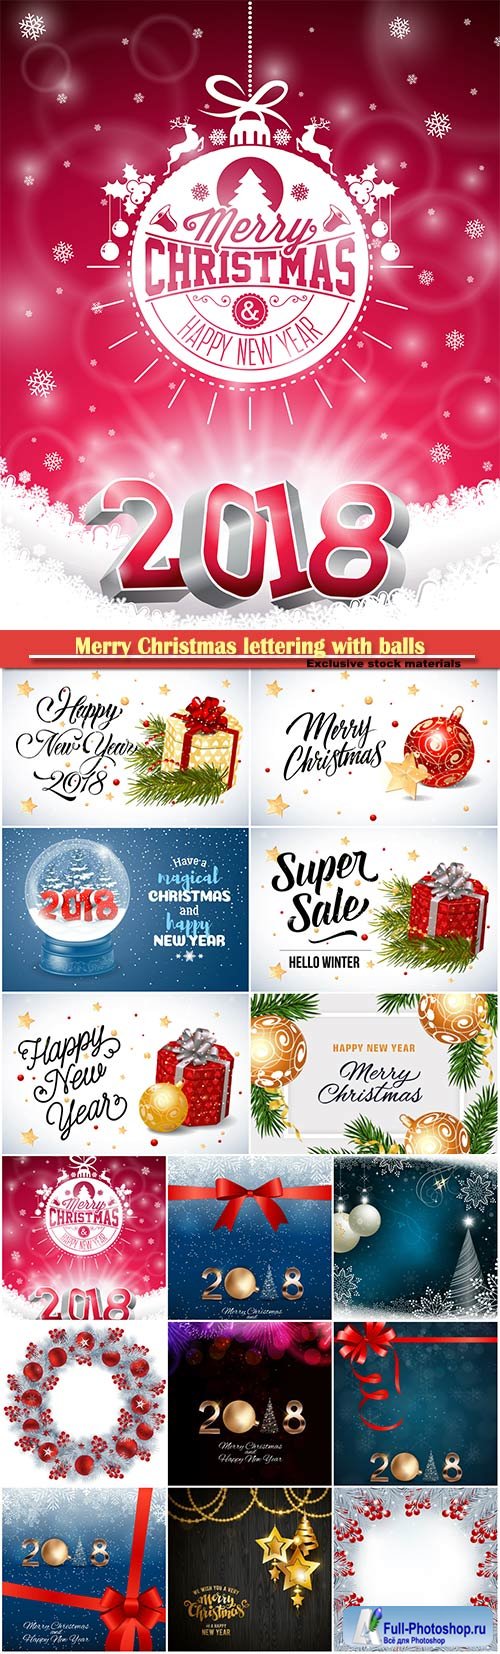 Merry Christmas lettering with balls design vector template